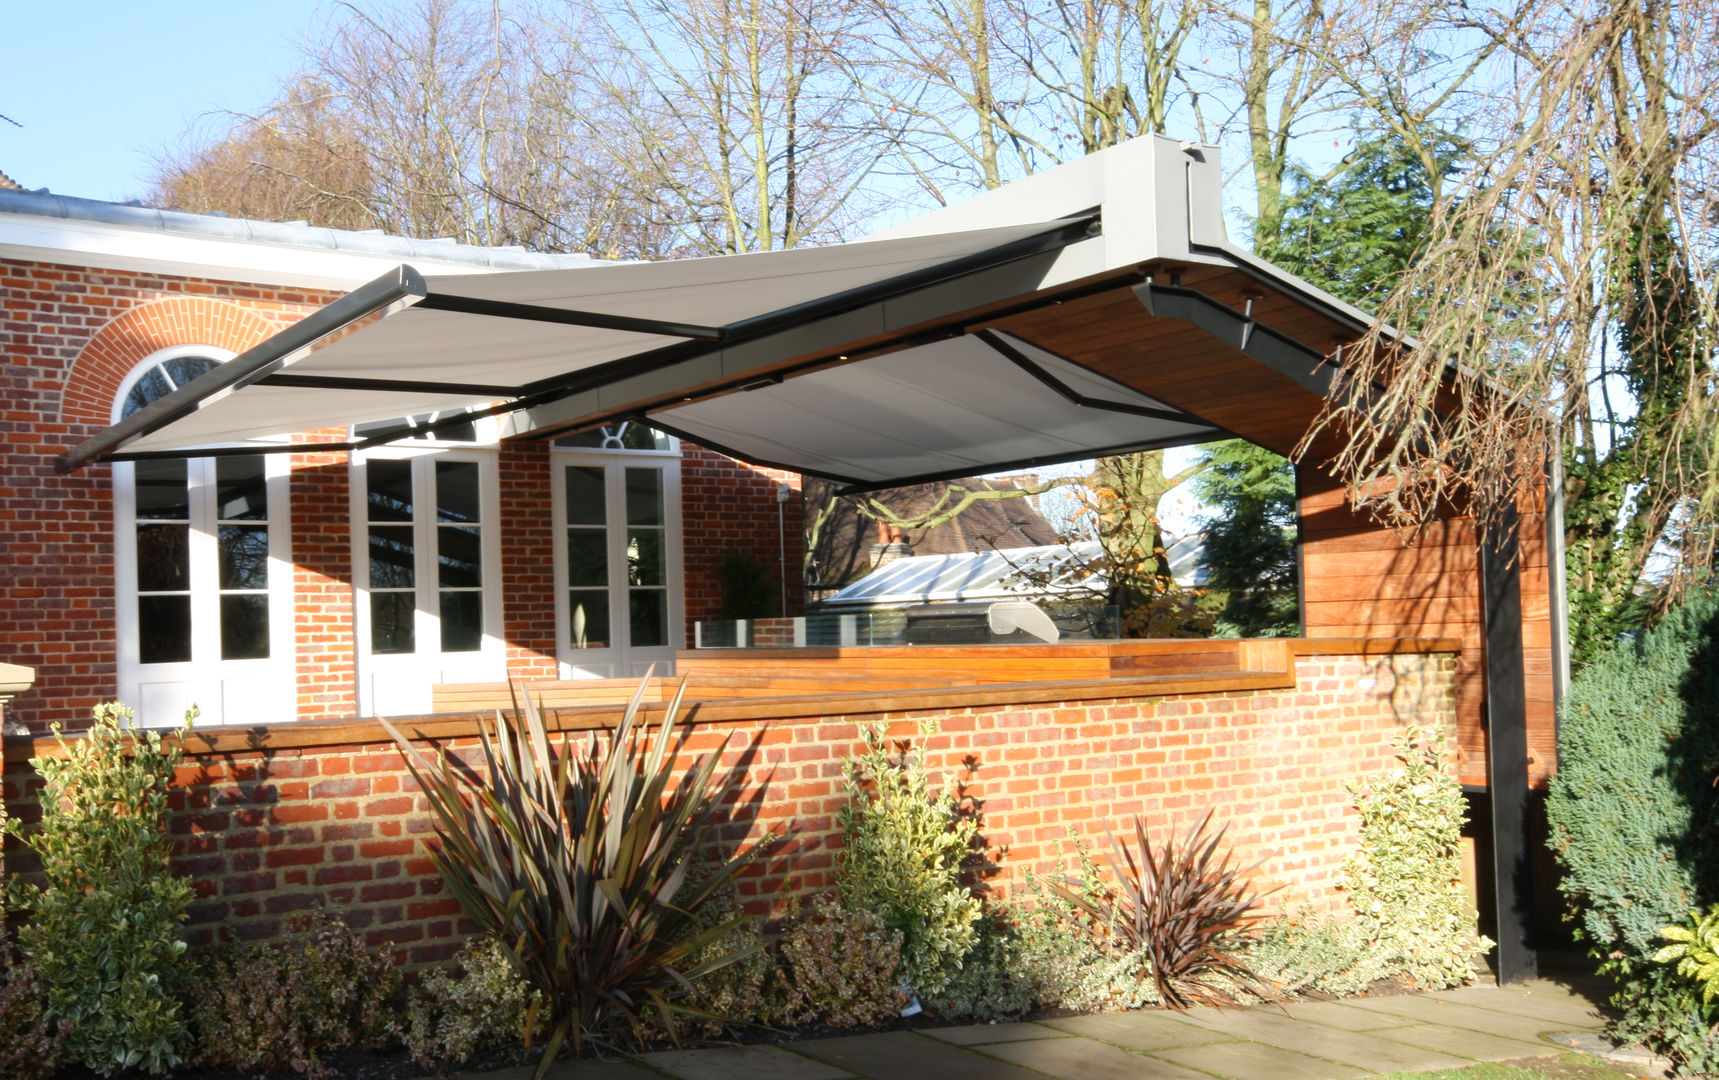 Patio Awning Installation in Cheshire. homify Modern Terrace patio,awning,terrace,canopy,garden,alfresco,shading